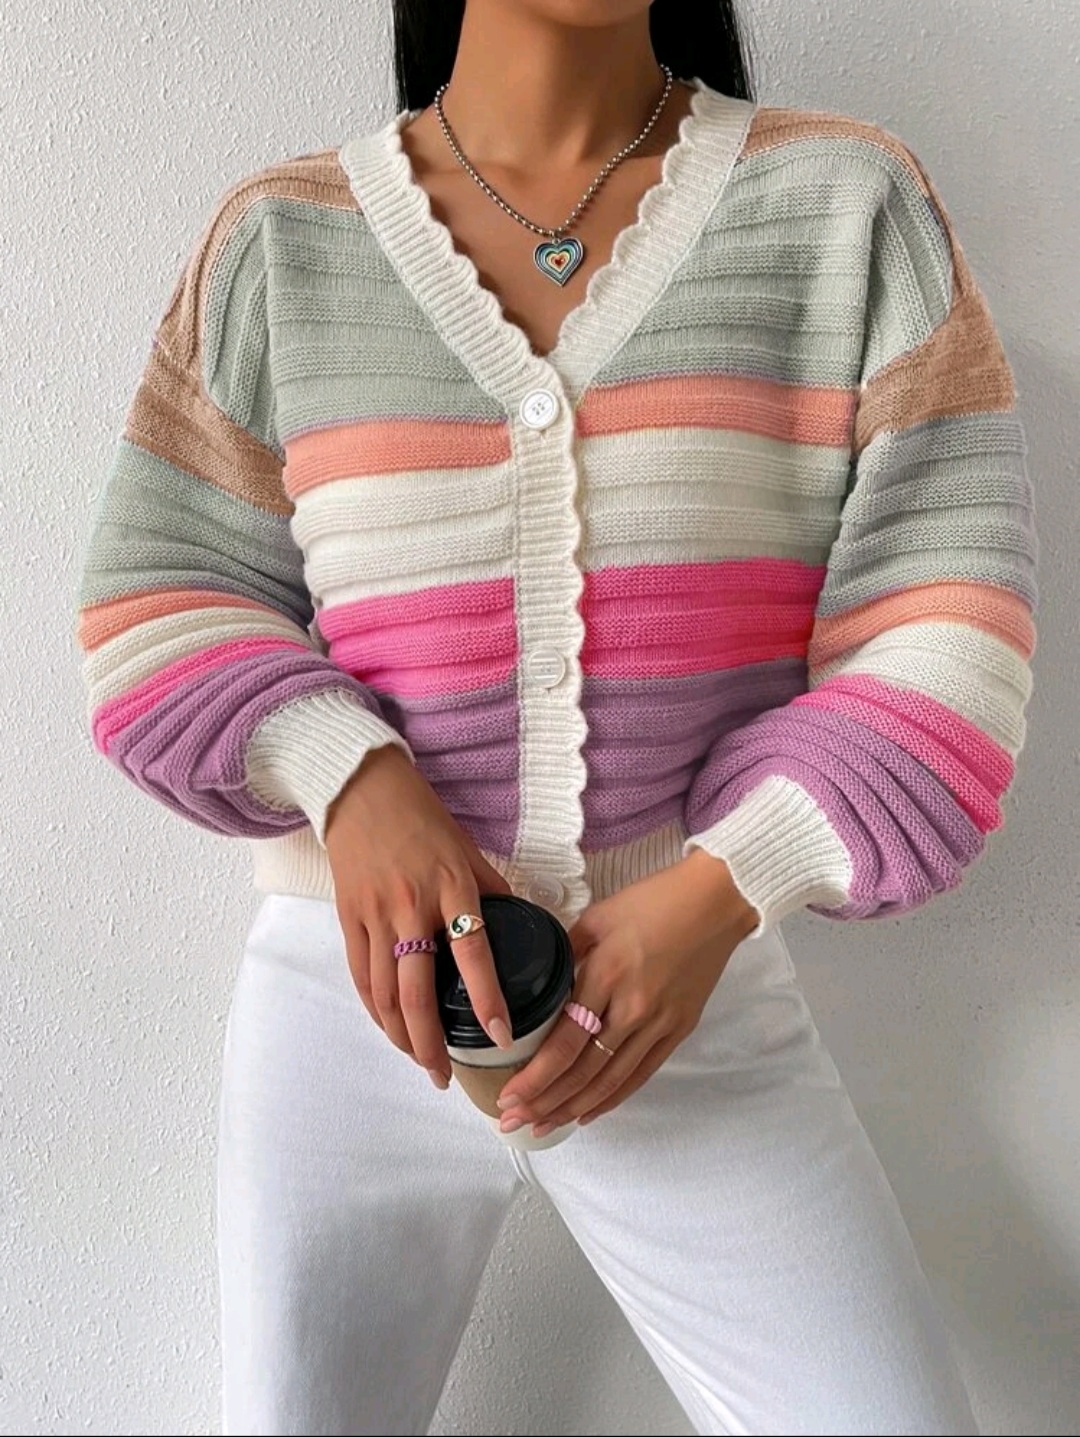 Cardigan in contrasting colors, striped, bow-shaped, low-shoulder